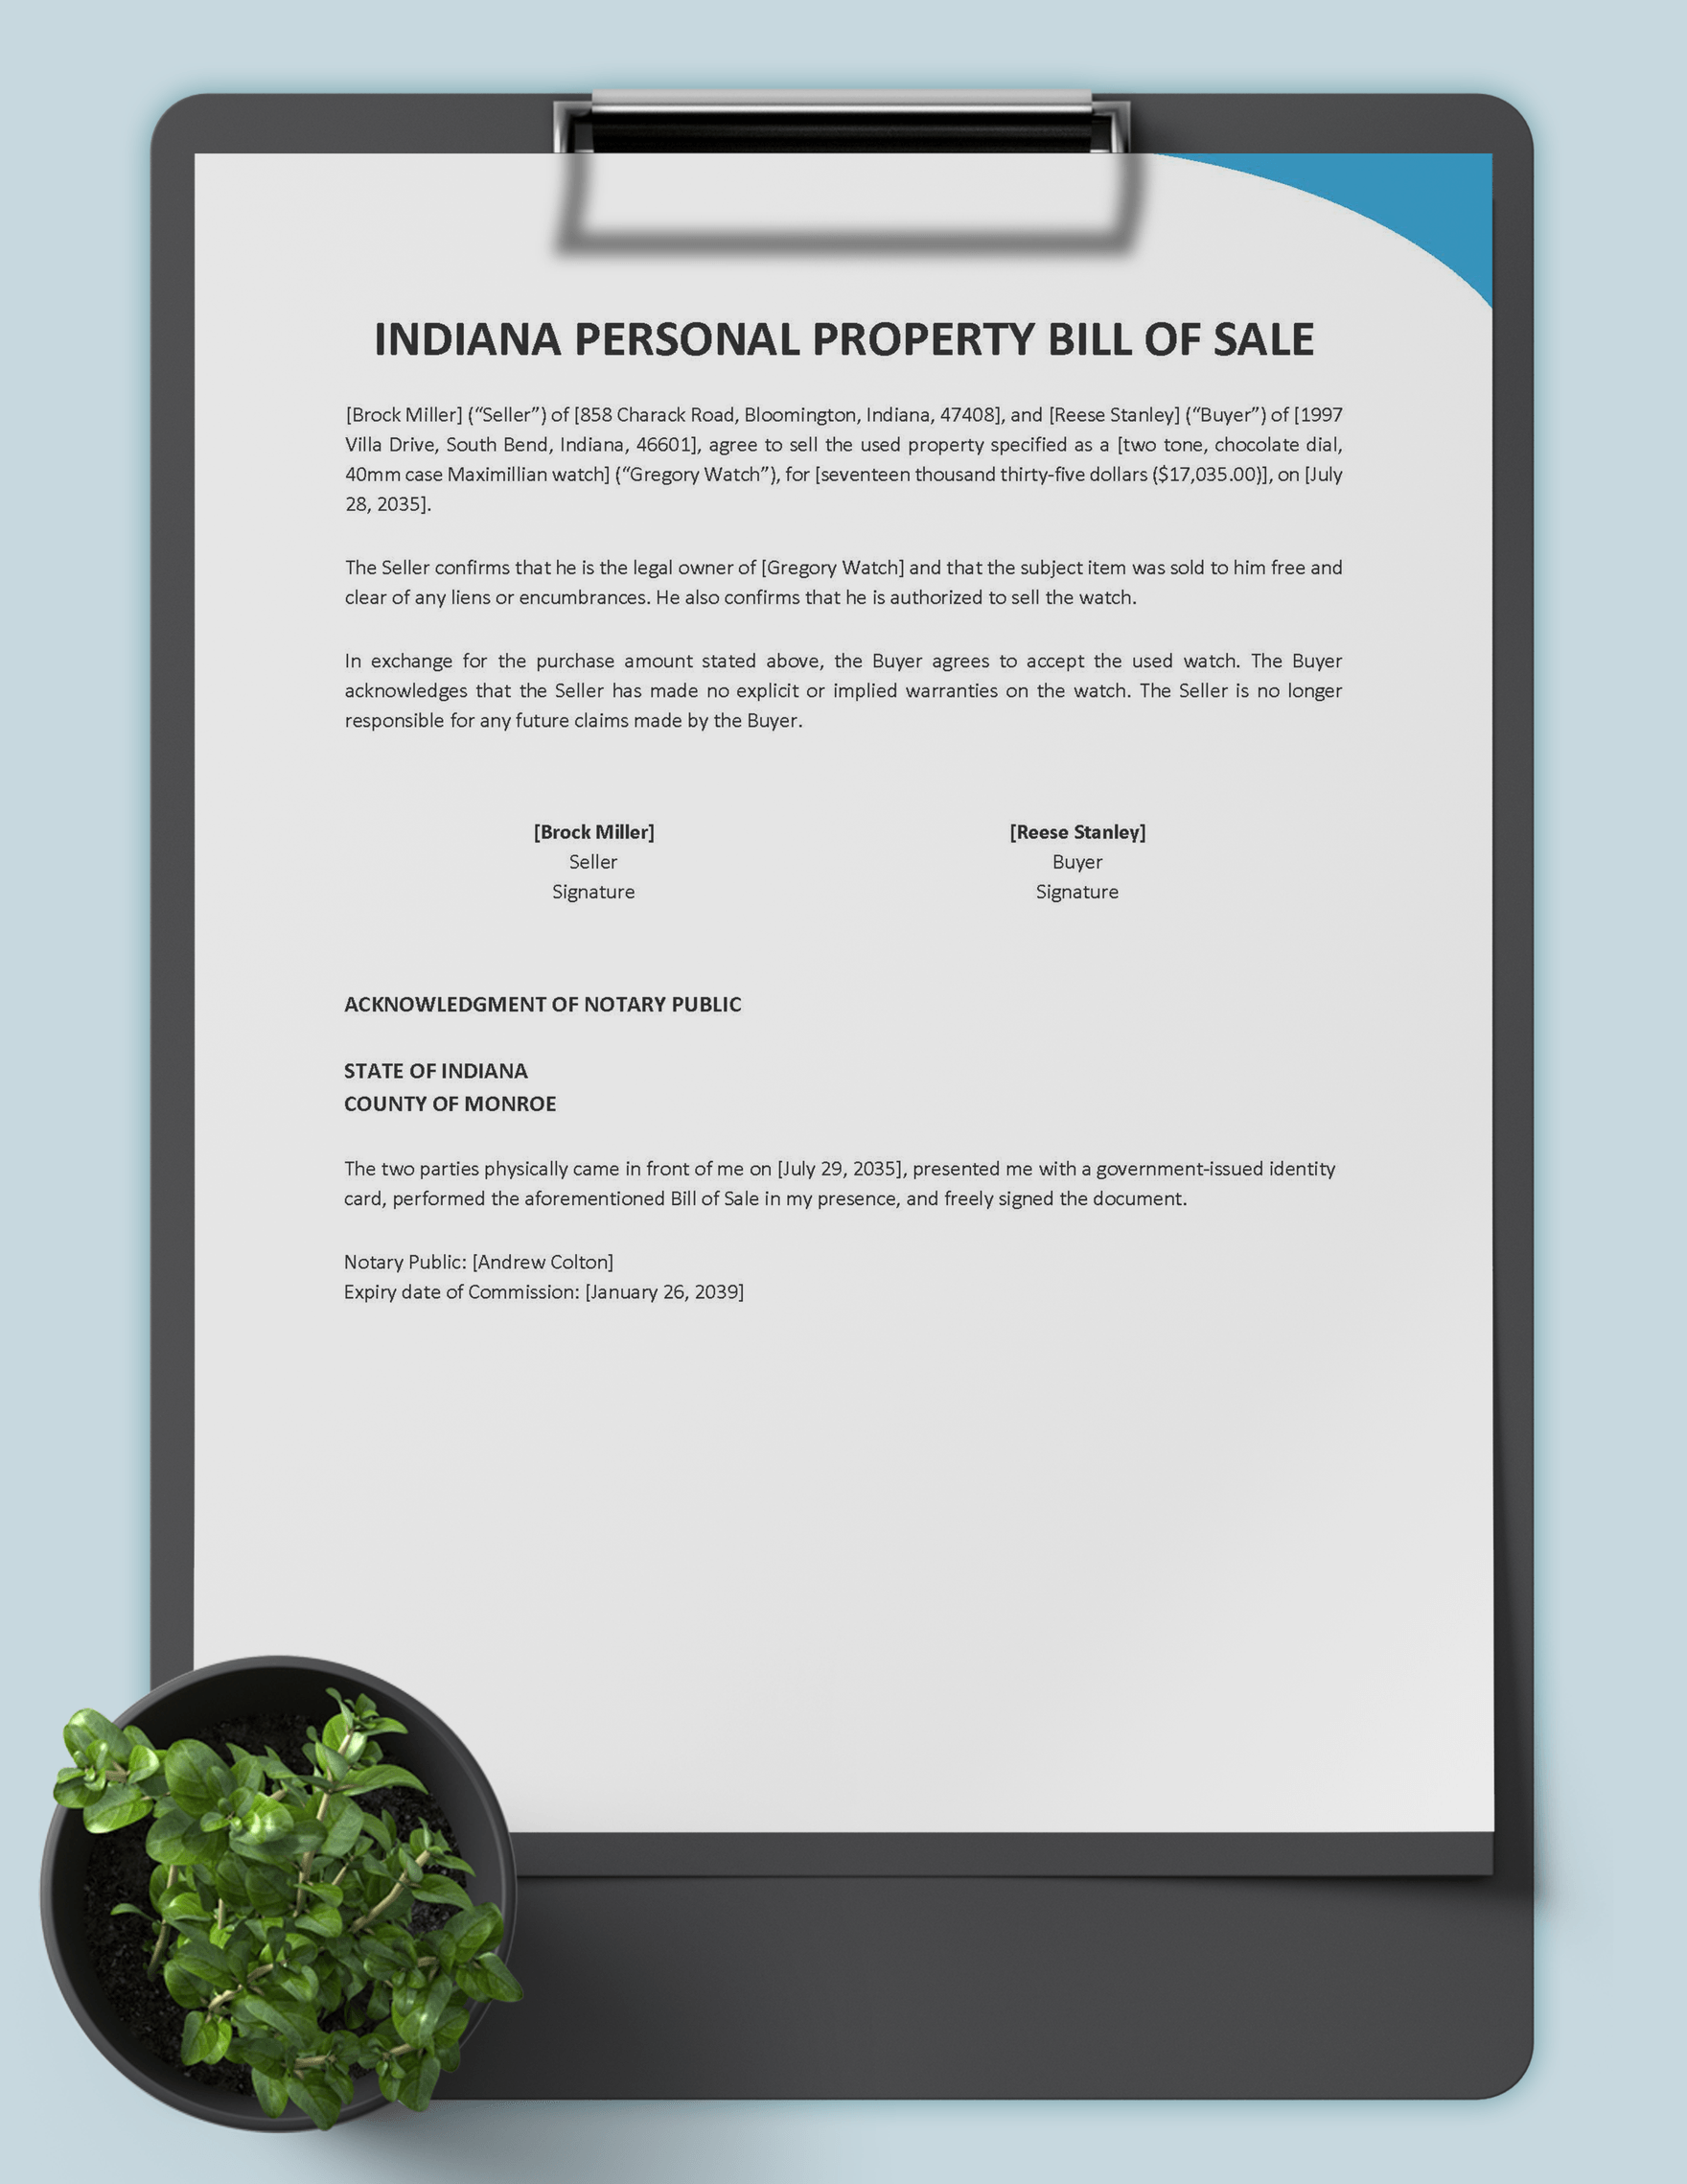 Indiana Personal Property Bill of Sale Template